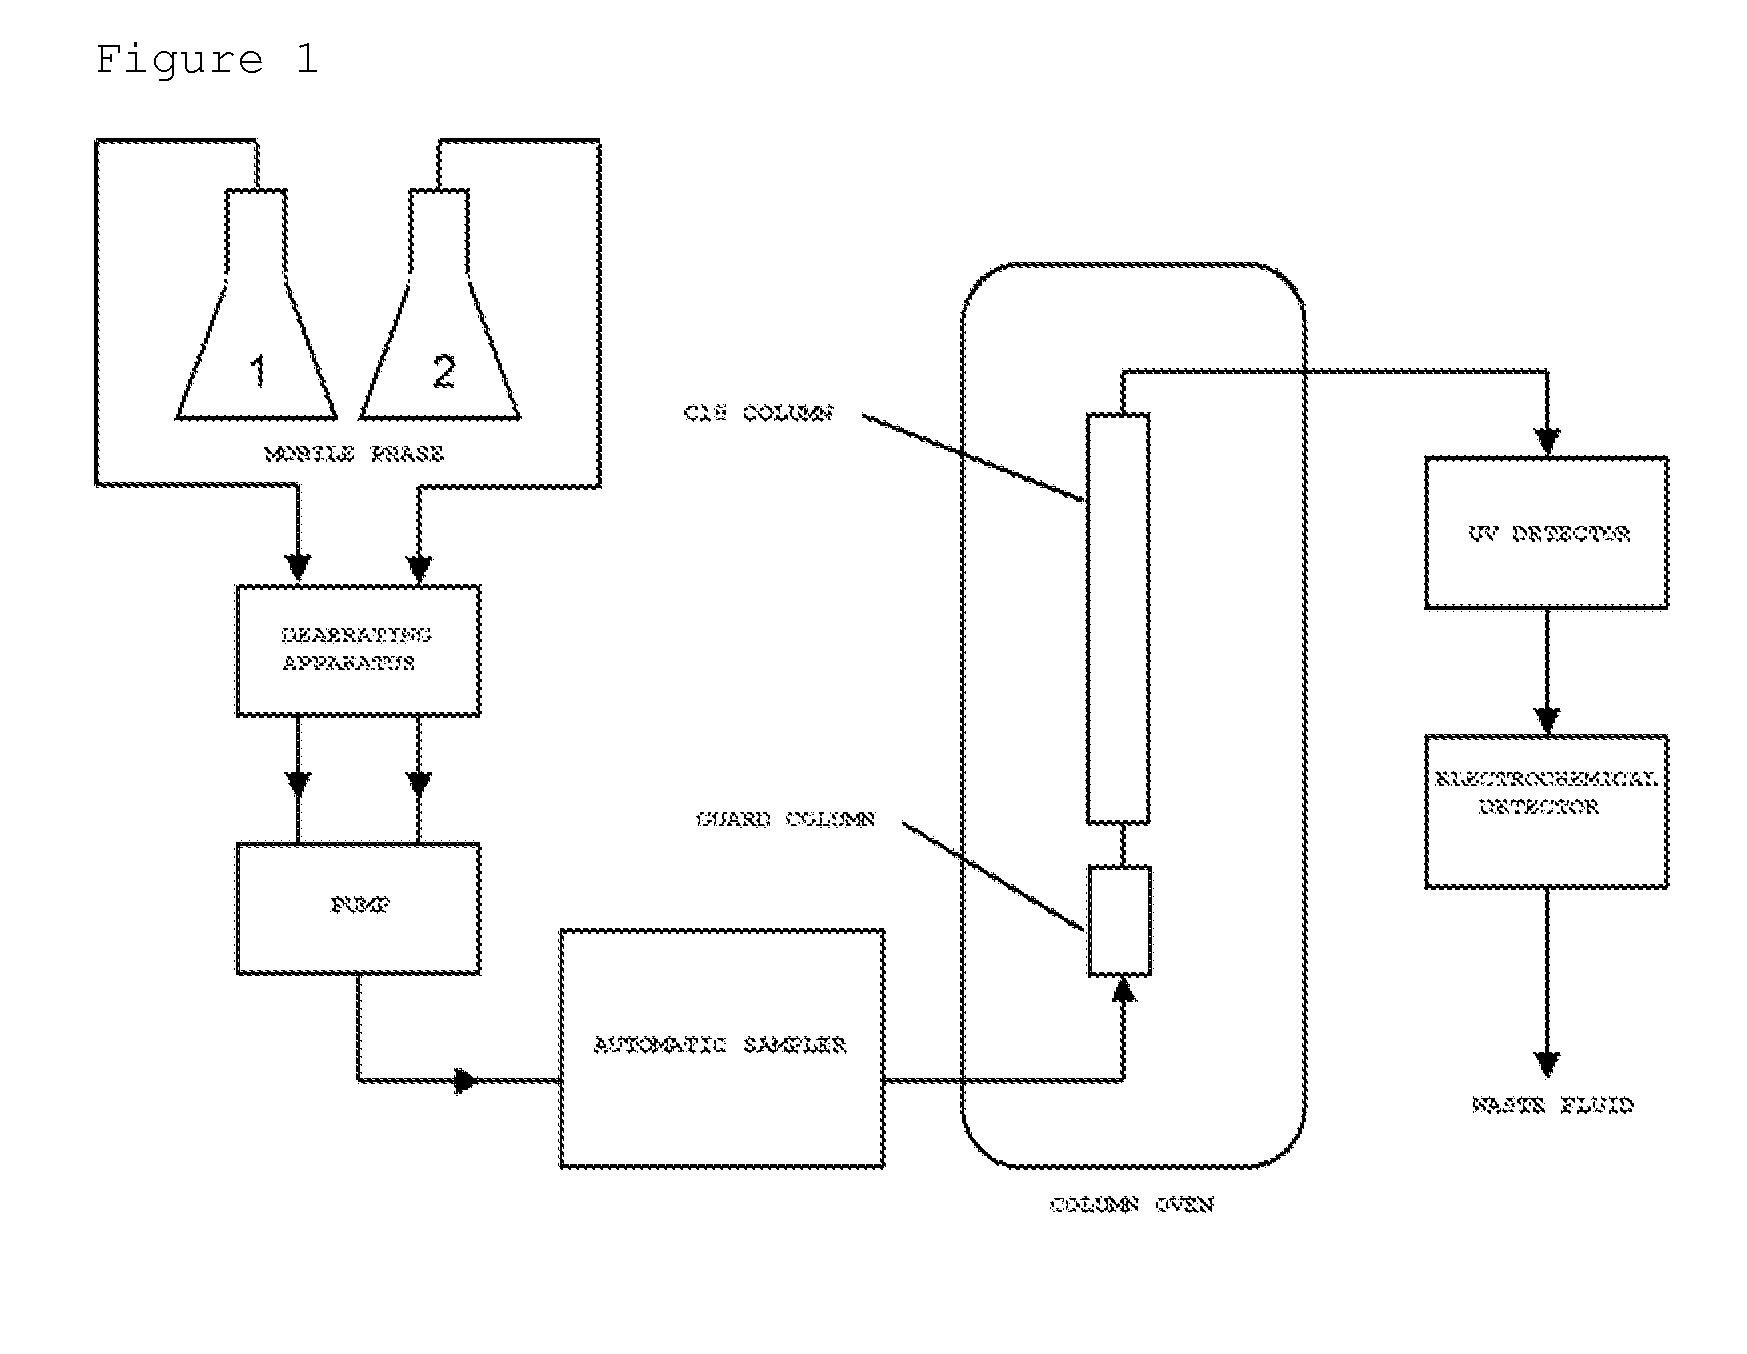 APPARATUS AND METHOD FOR MEASURING 8-OHdG